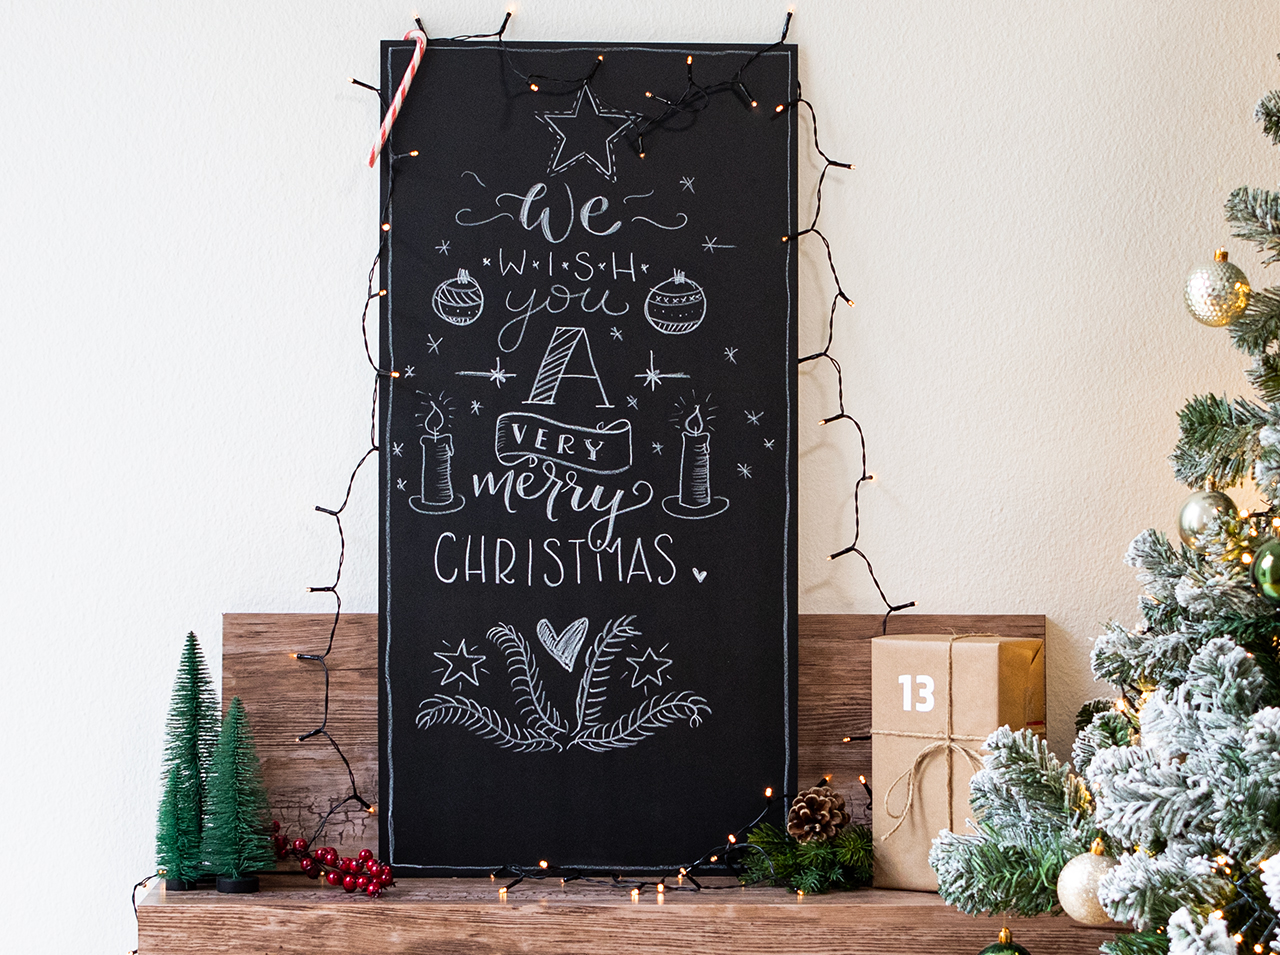 Large board covered with chalkboard foil written and drawn on using a chalk pen.